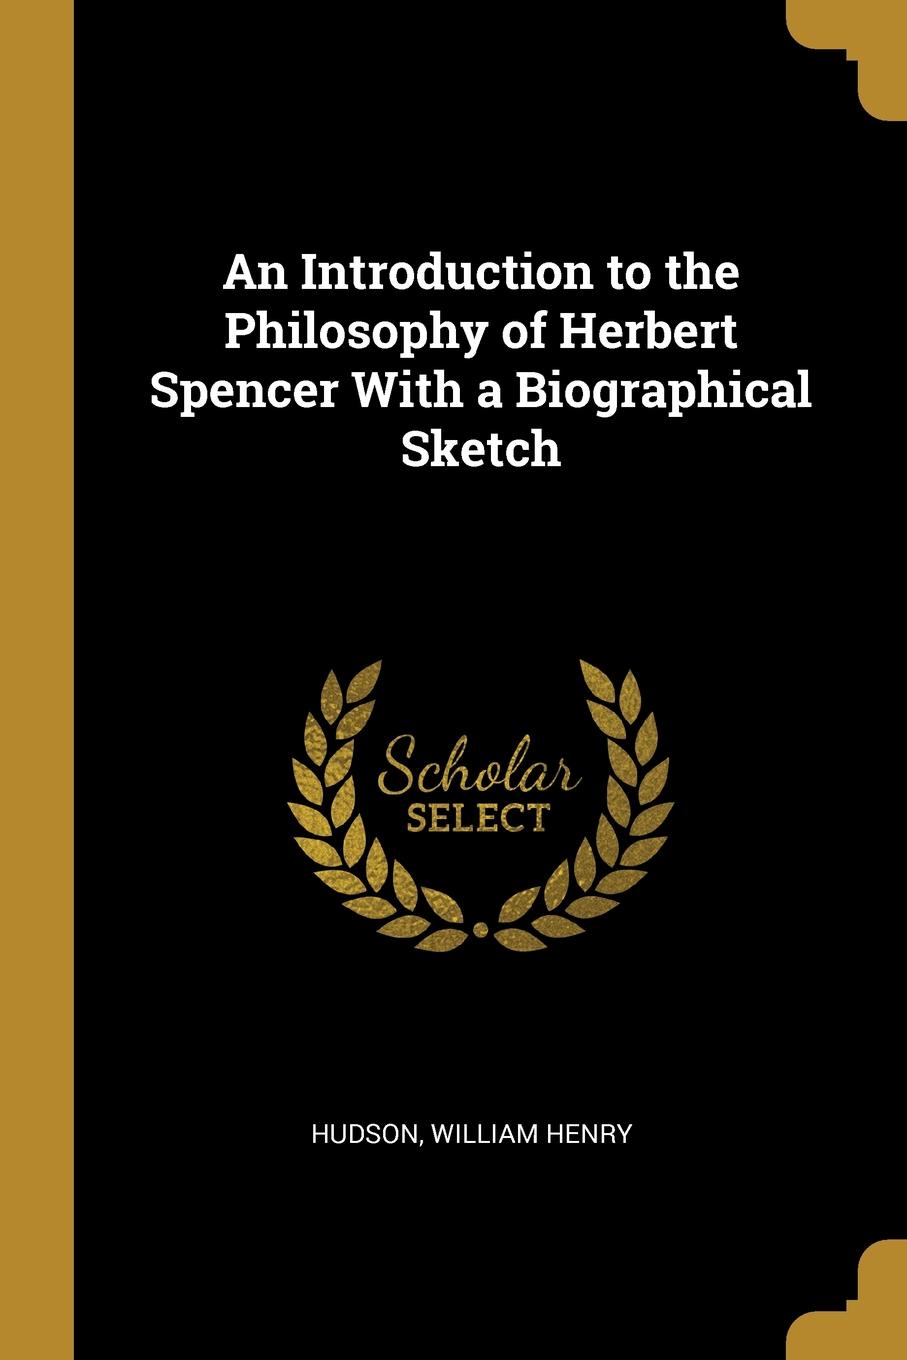 An Introduction to the Philosophy of Herbert Spencer With a Biographical Sketch